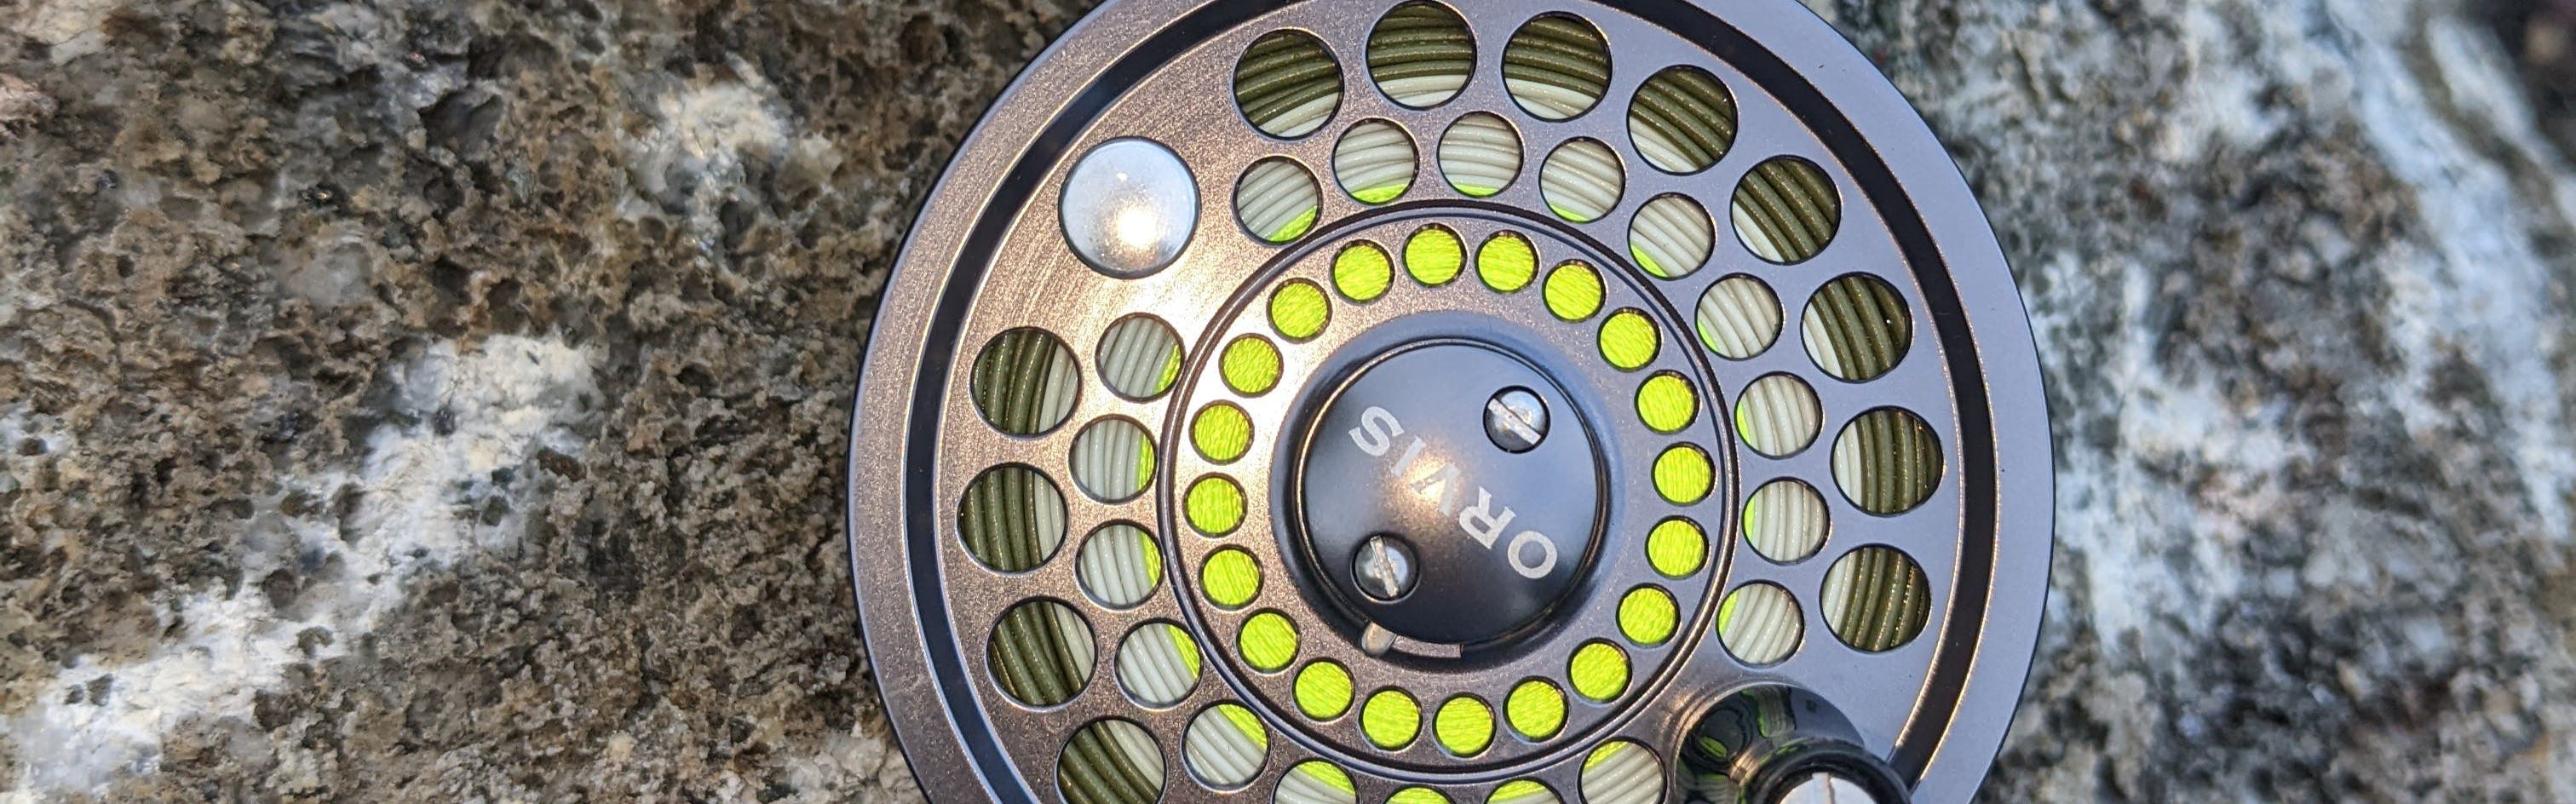 New Battenkill disc vs the old Battenkill; how do they compare based on  your experience? : r/flyfishing